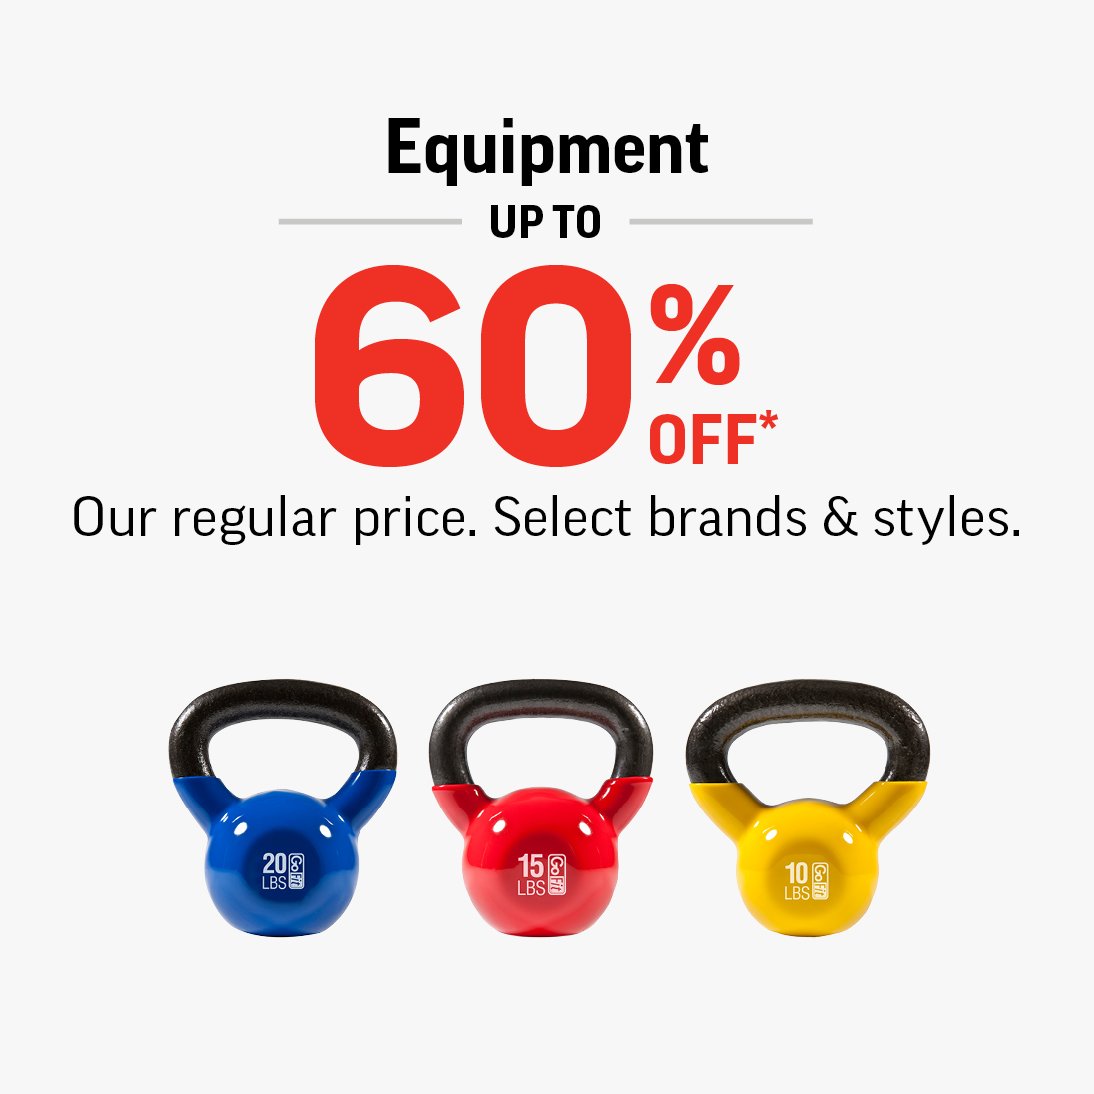 EQUIPMENT UP TO 60% OFF 